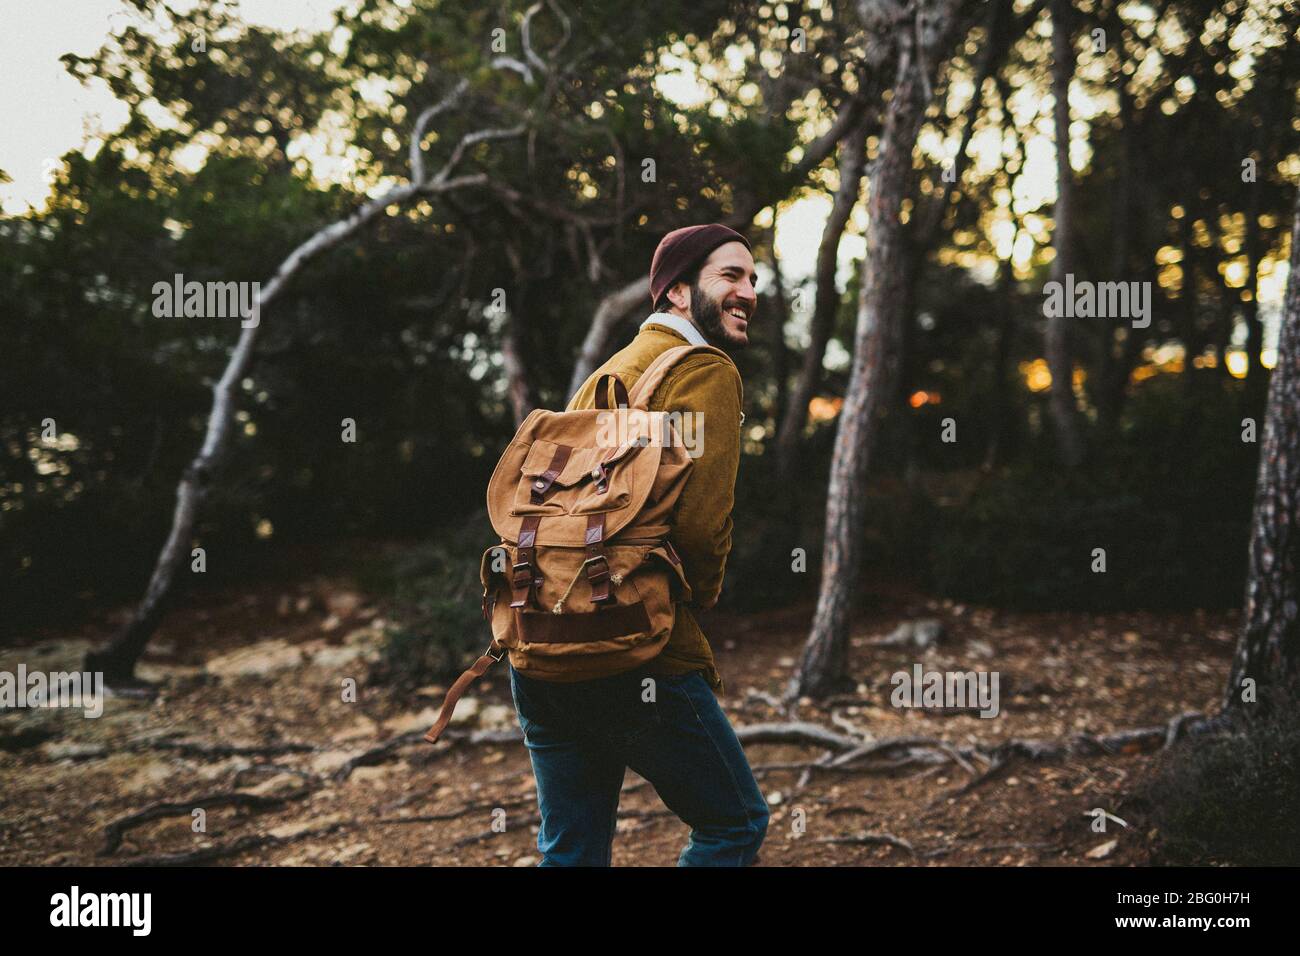 Portrait Of Young Man Carrying Camera outdoors Stock Photo